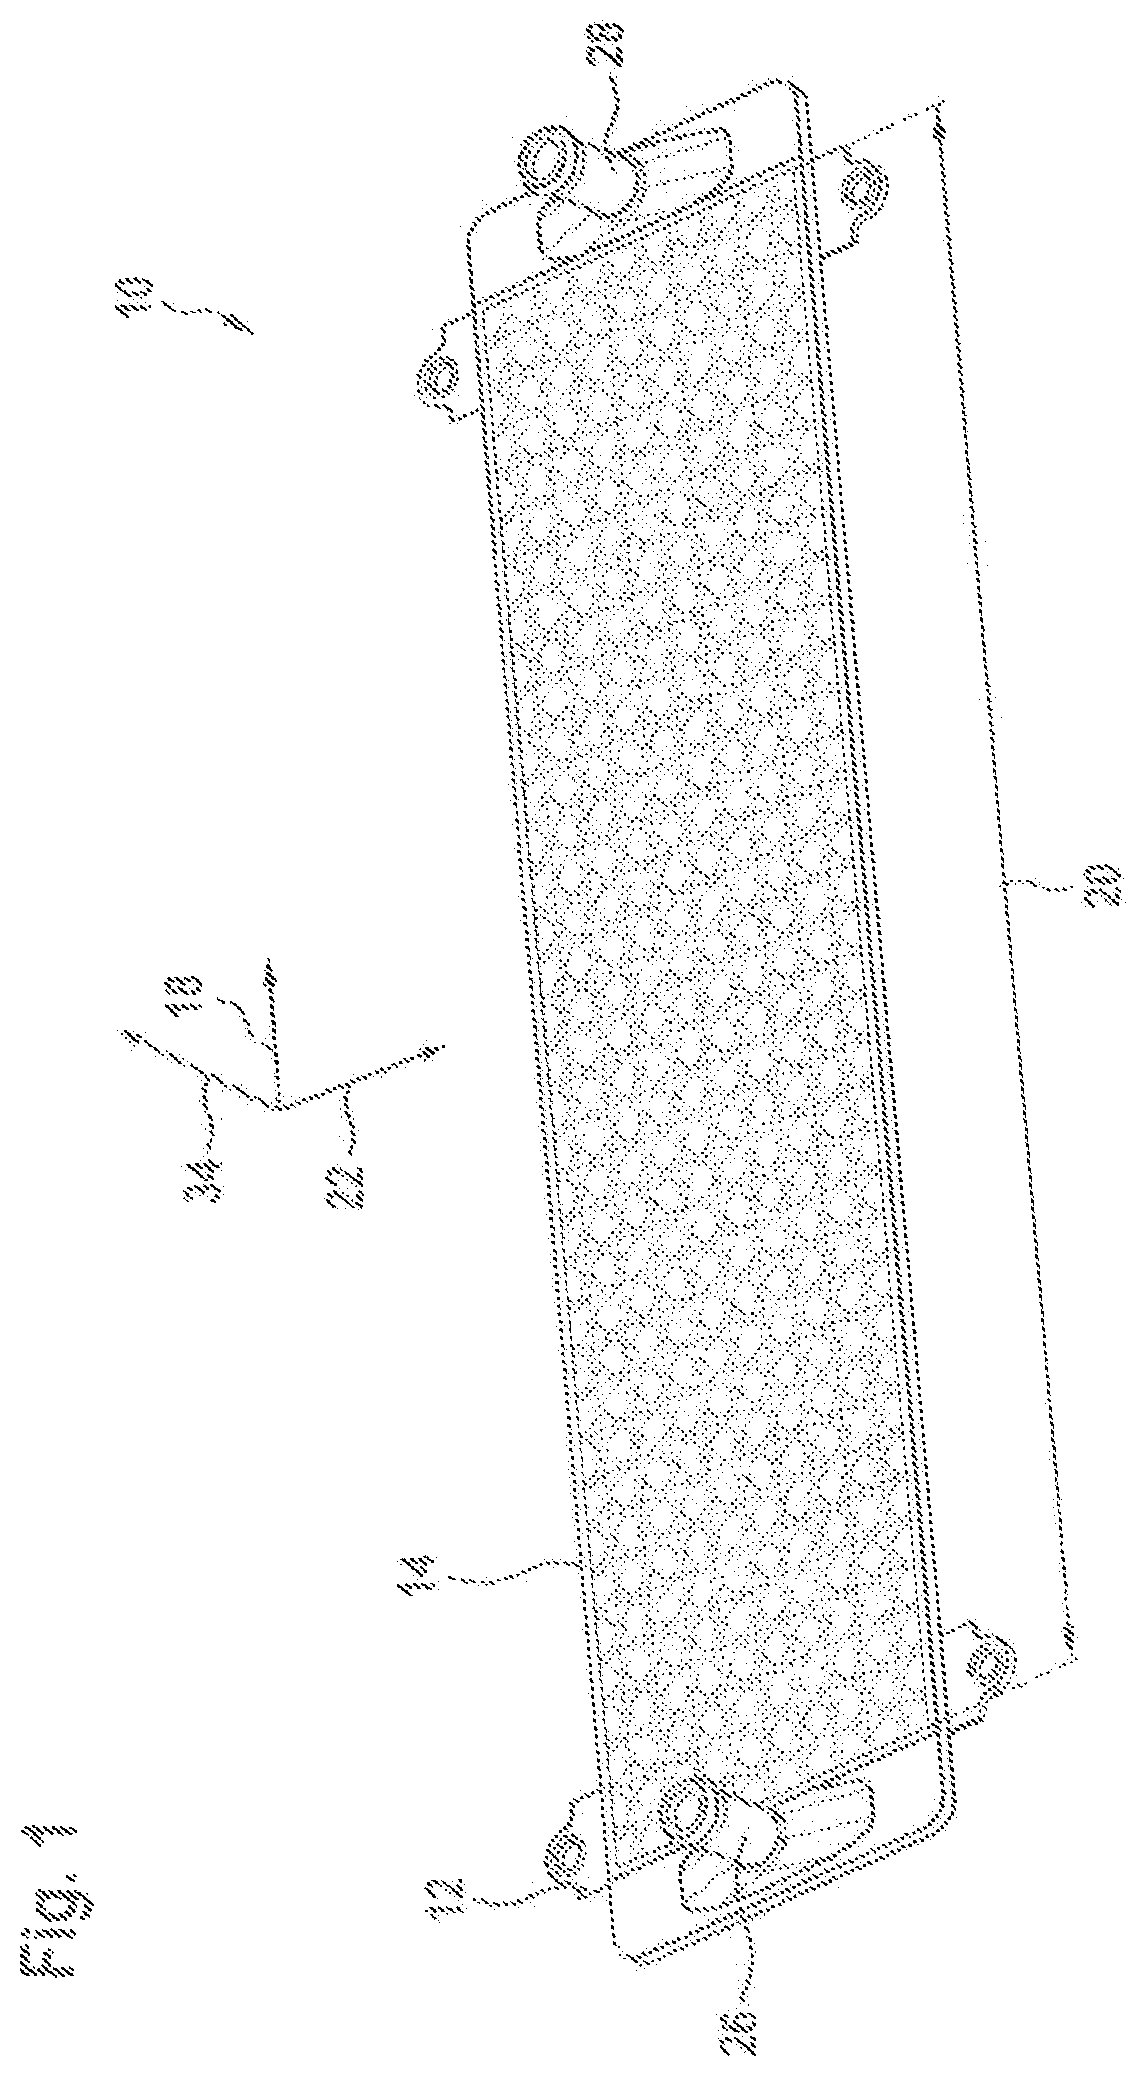 Cooling plate for controlling the temperature of at least one battery cell, and battery system